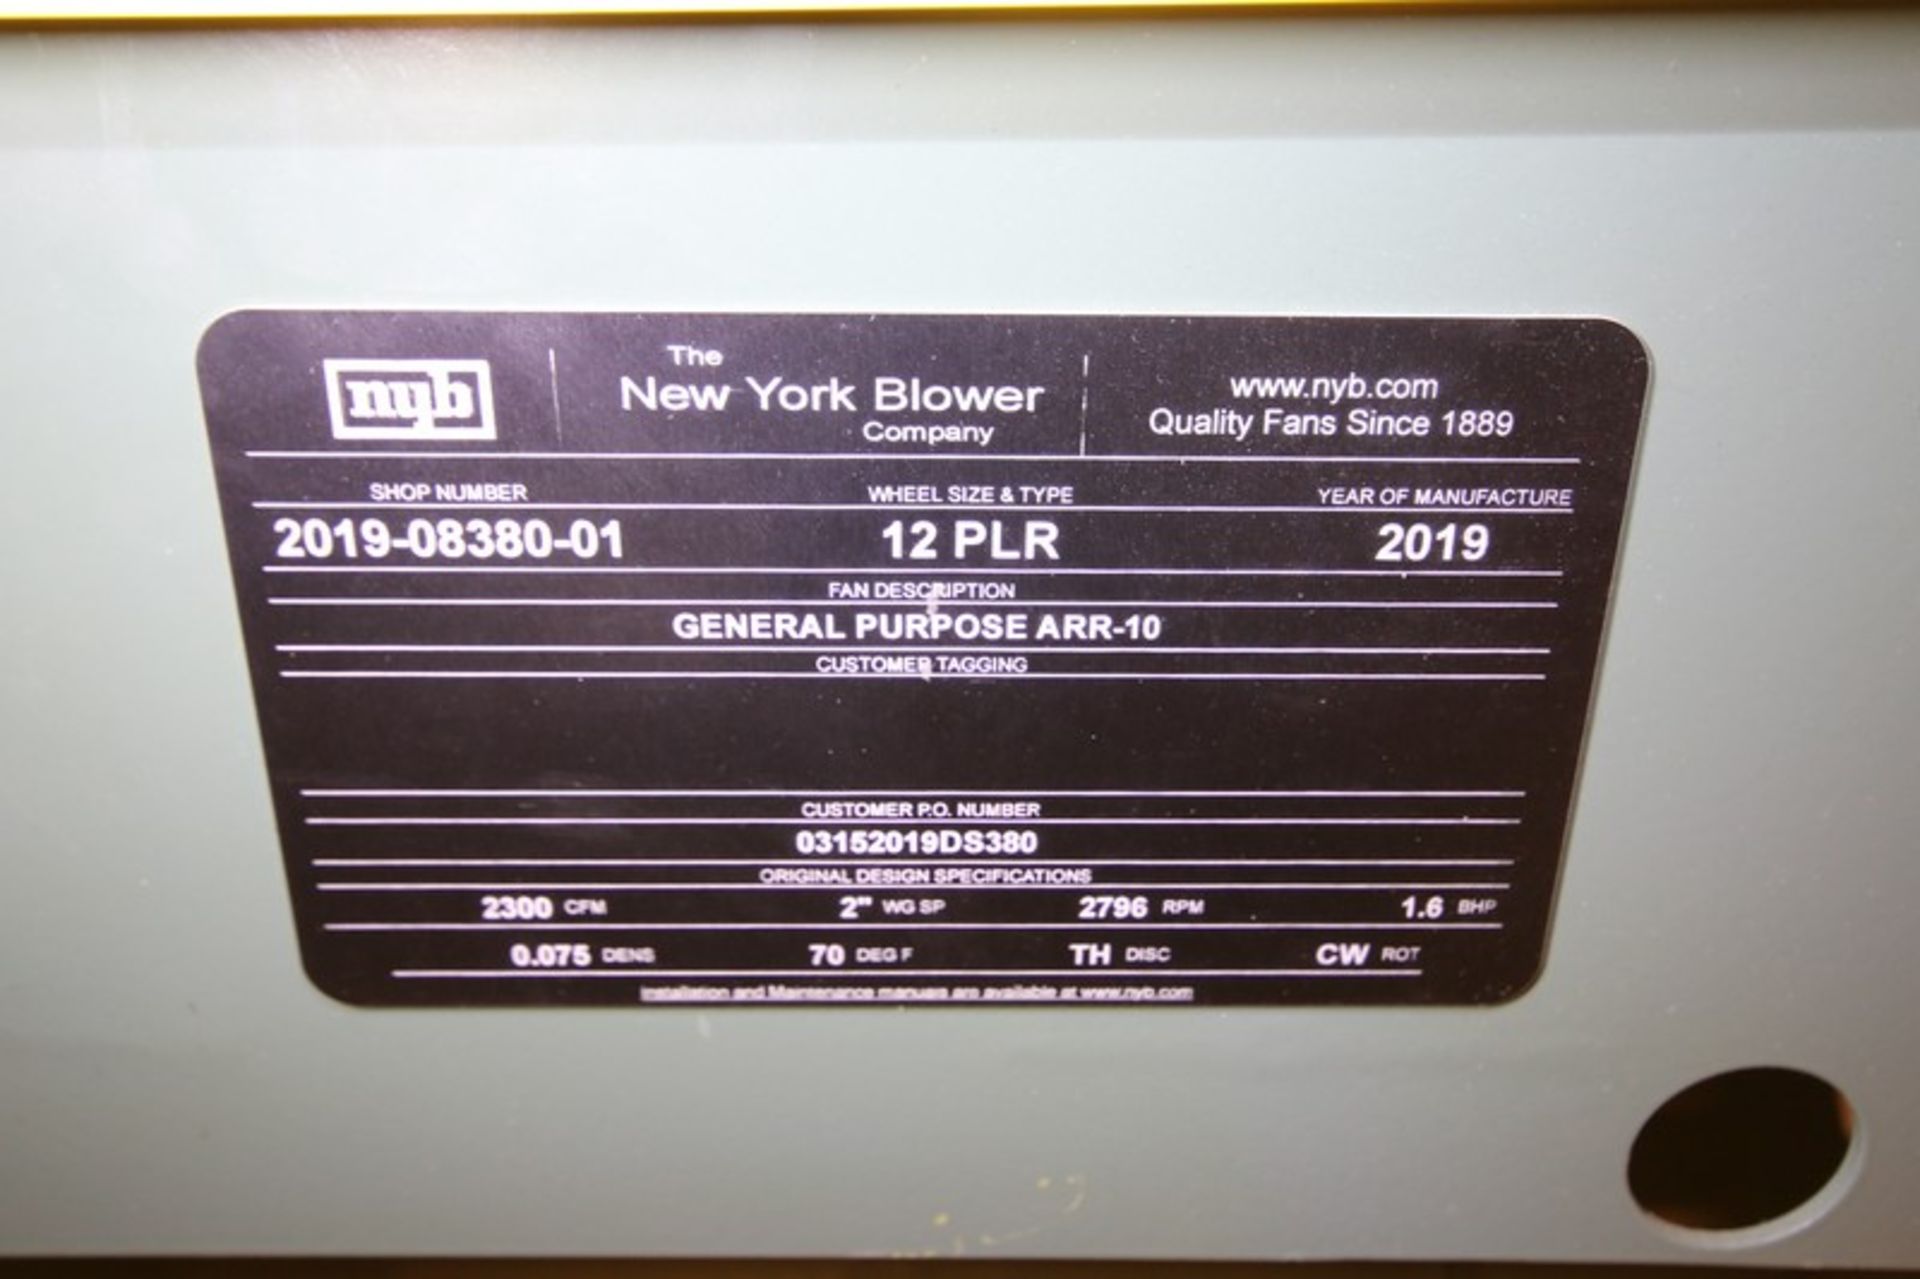 New NYB Blower, Type 12 PLR, Shop #2019-08380-01, Connection Size - 9" W x 14" H, 2300 cfm (INV# - Image 5 of 5